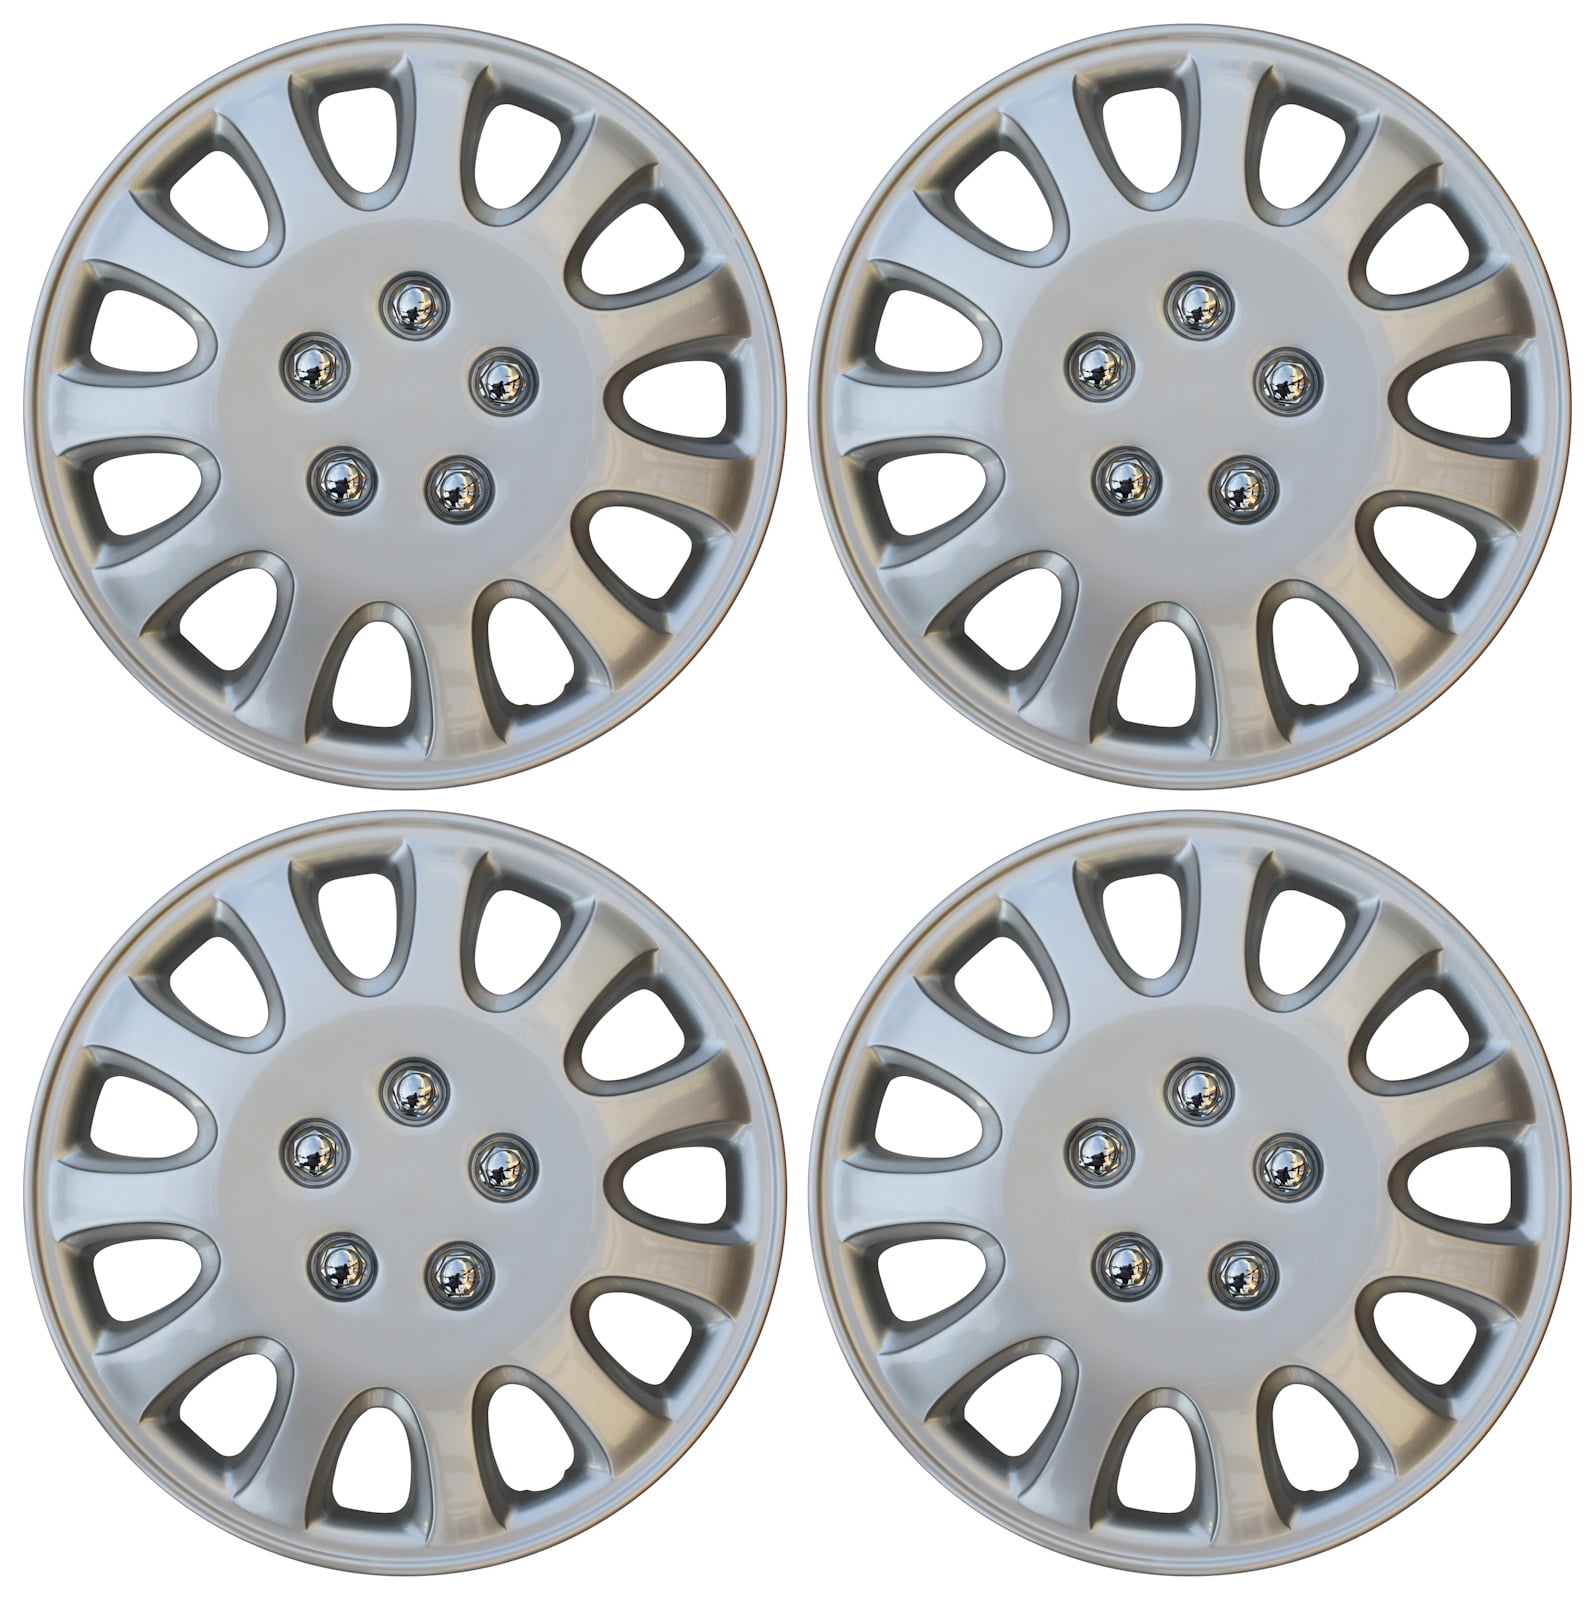 #157 Replacement 14" Inches Metallic Silver Hubcaps 4pcs Set Hub Cap Wheel Cover 